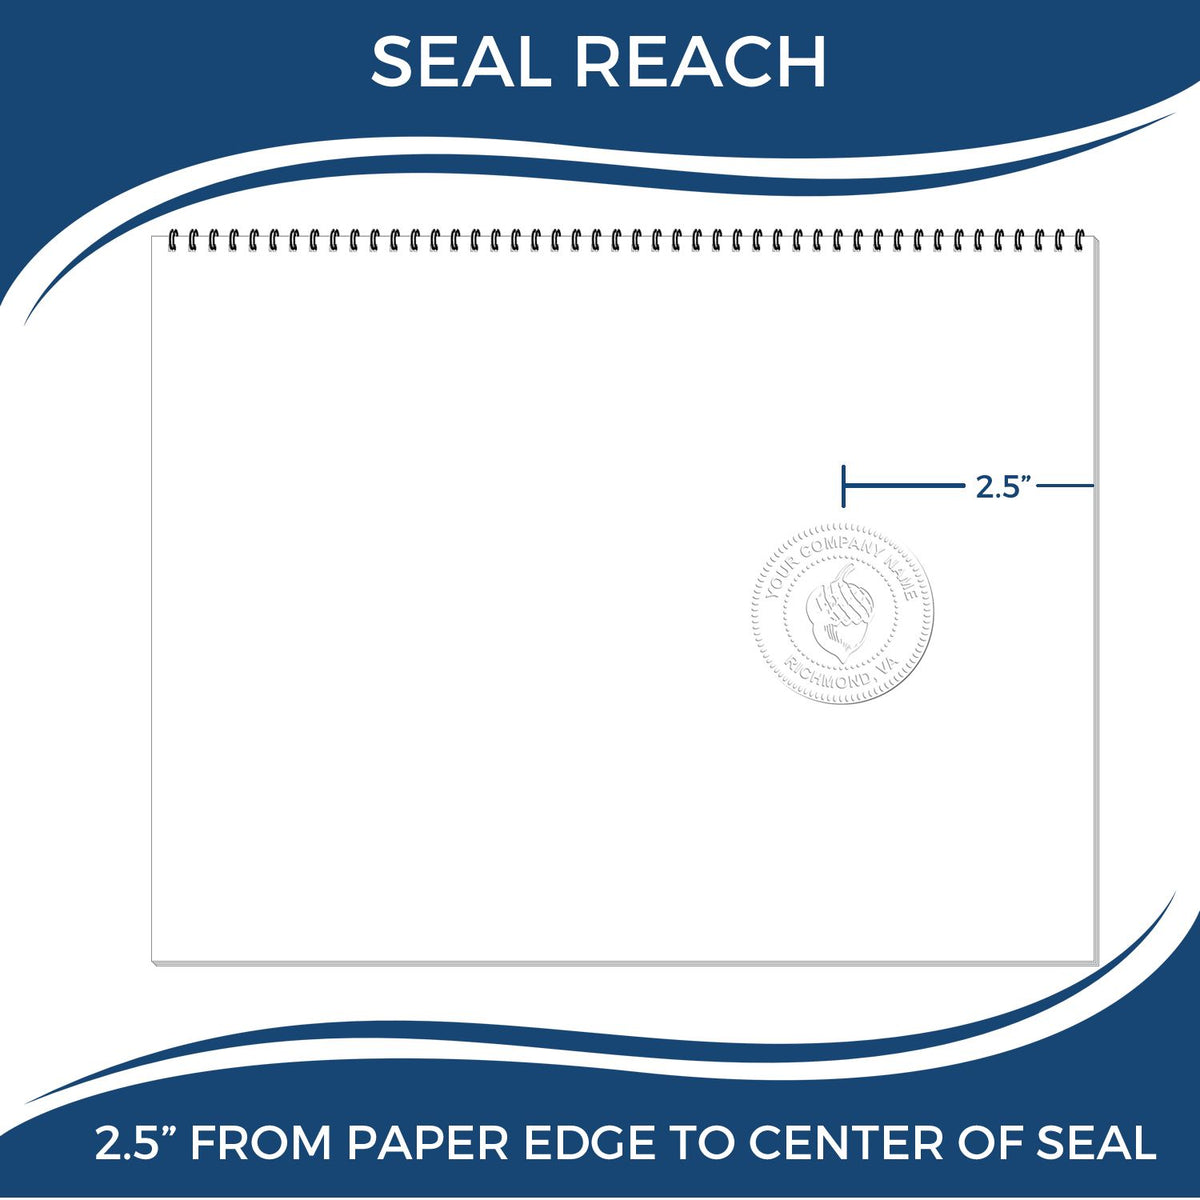 An infographic showing the seal reach which is represented by a ruler and a miniature seal image of the Heavy Duty Cast Iron New Mexico Architect Embosser